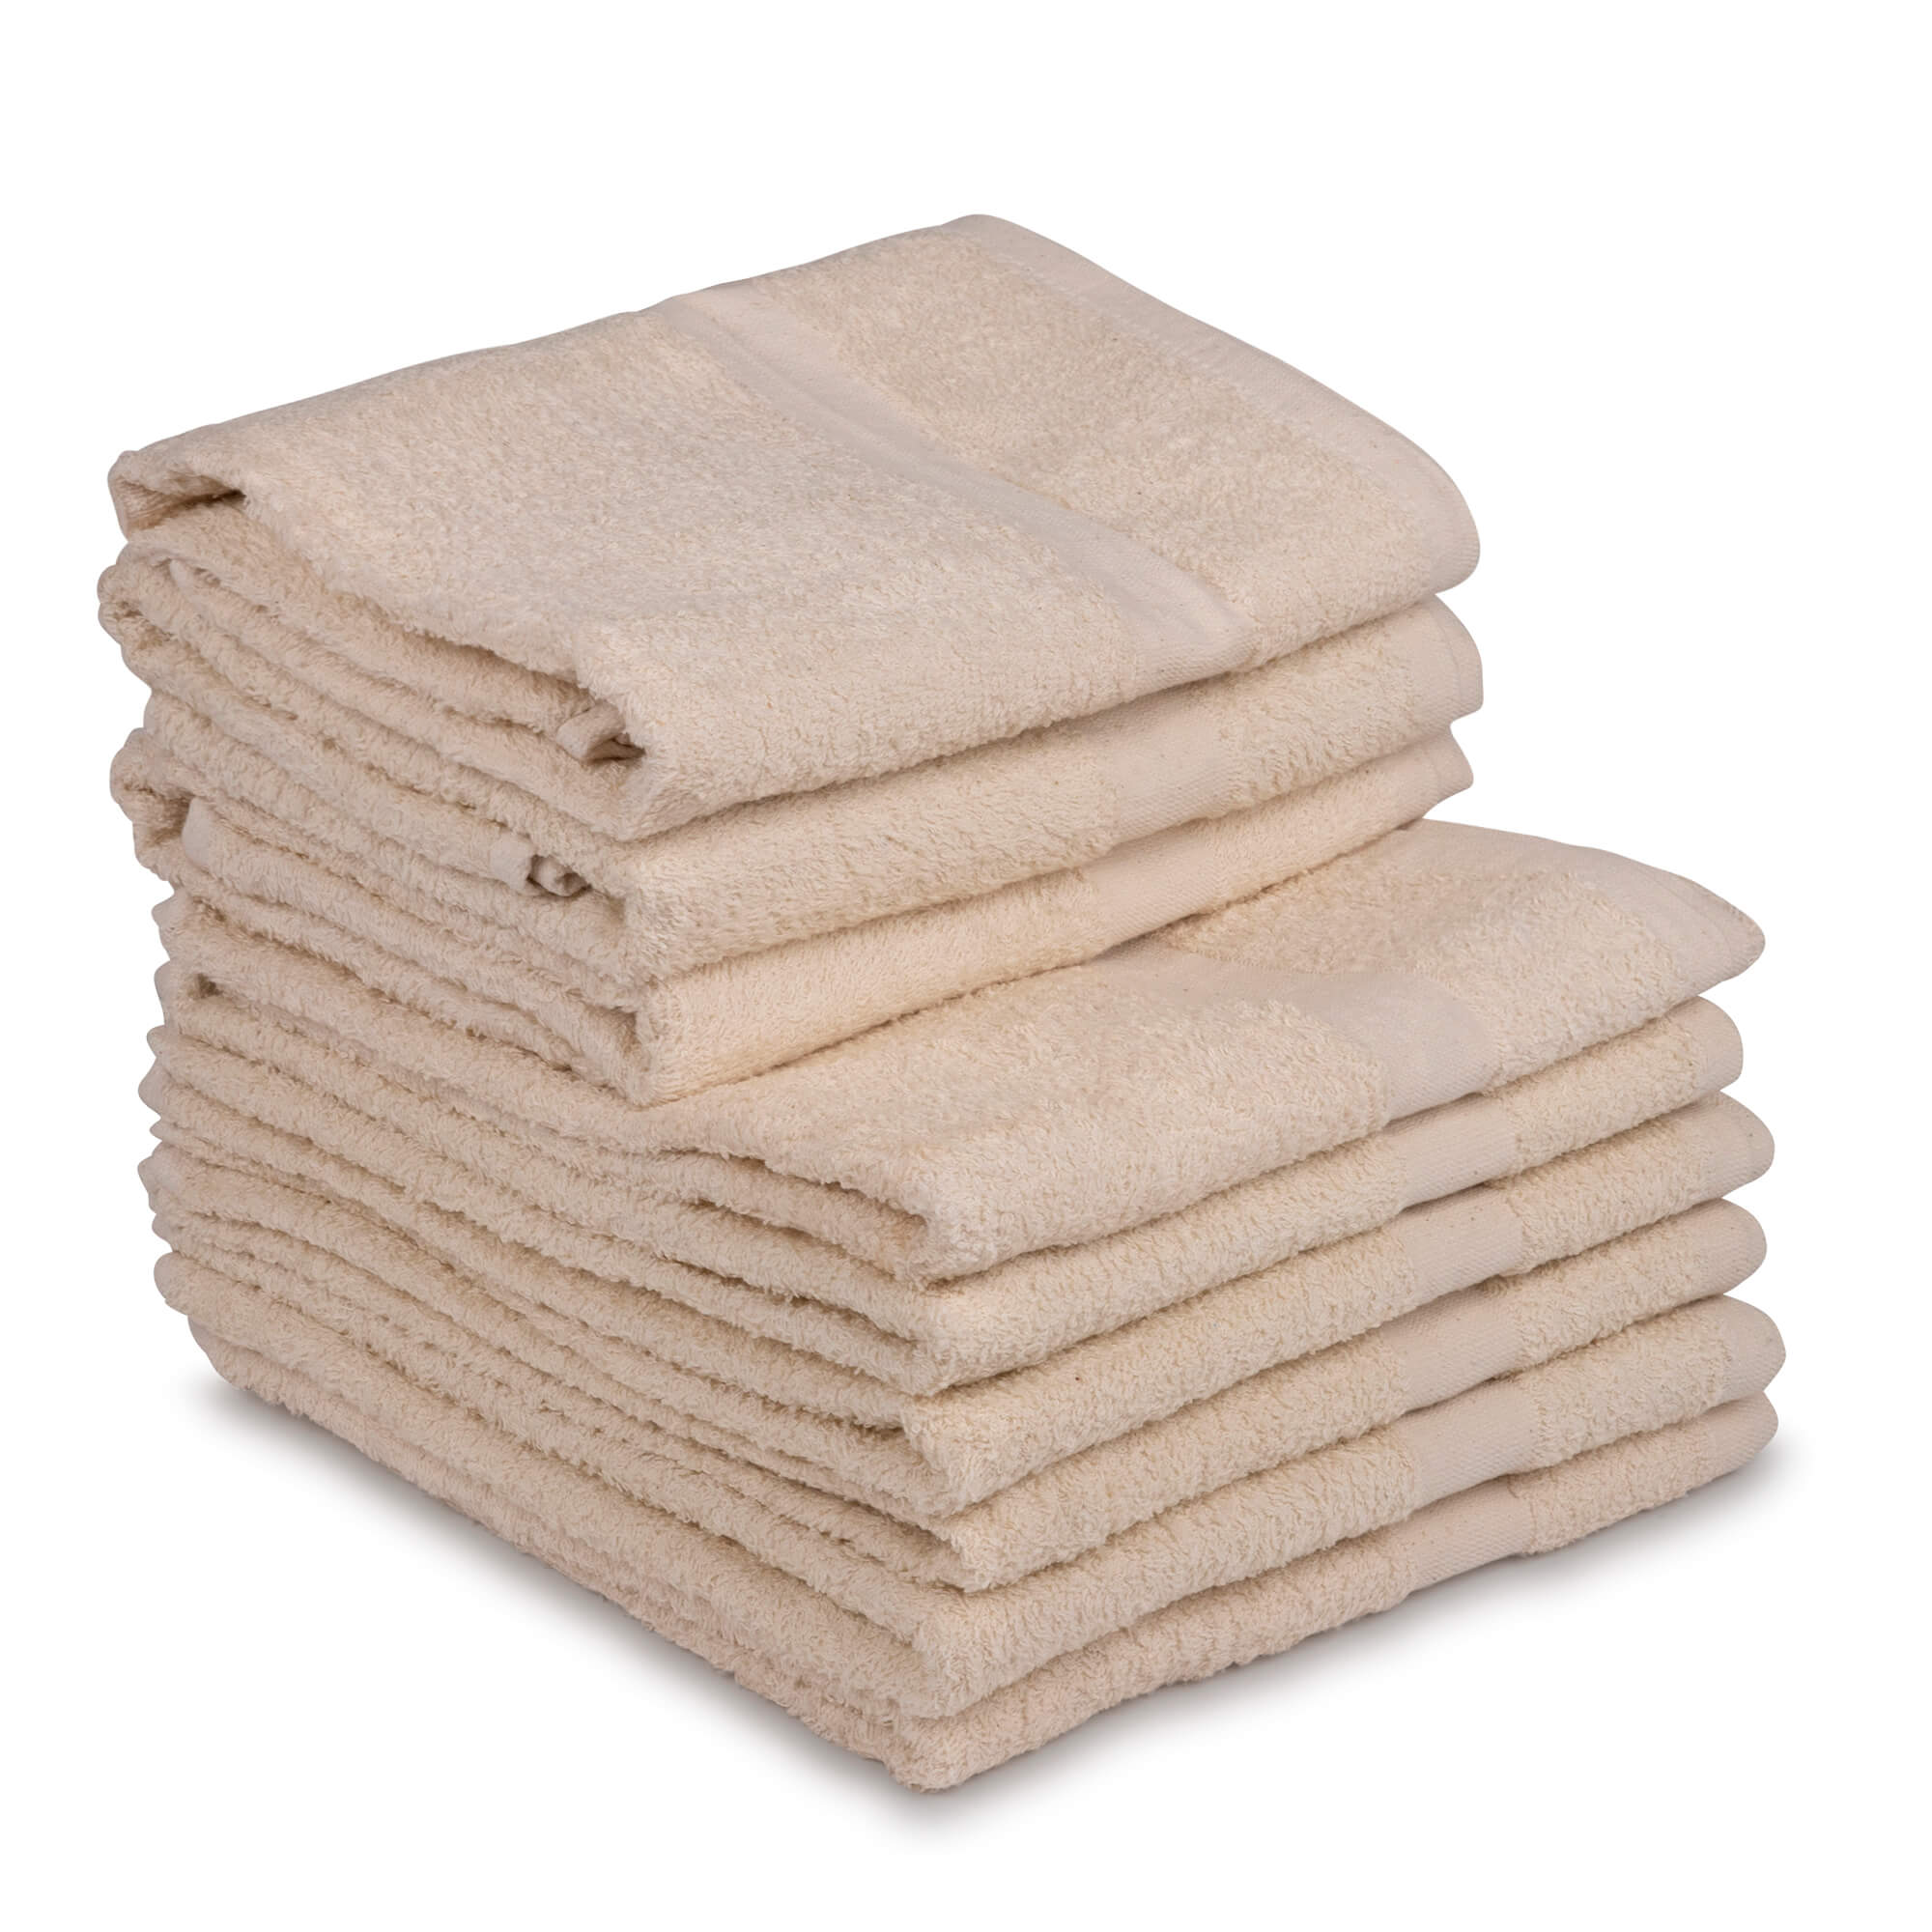 Colored Towels & Washcloths, 16 Single